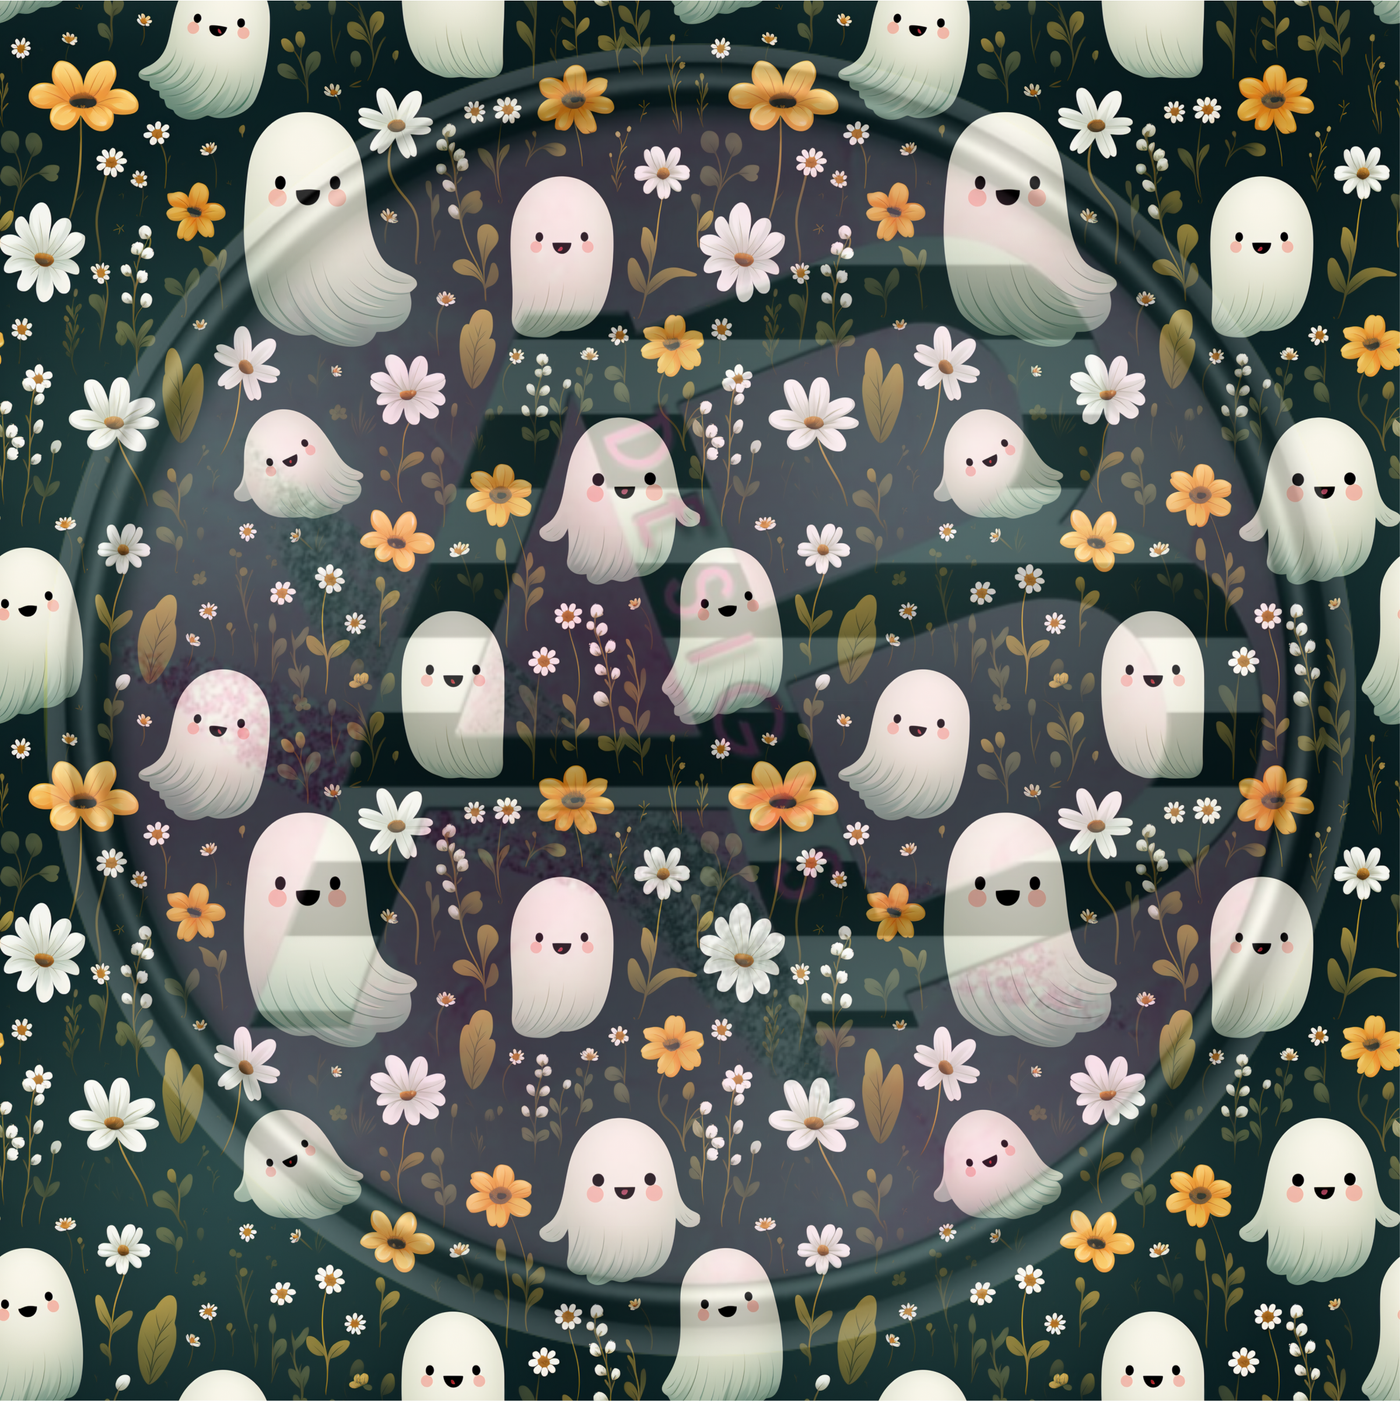 Adhesive Patterned Vinyl - Ghost 03 Smaller